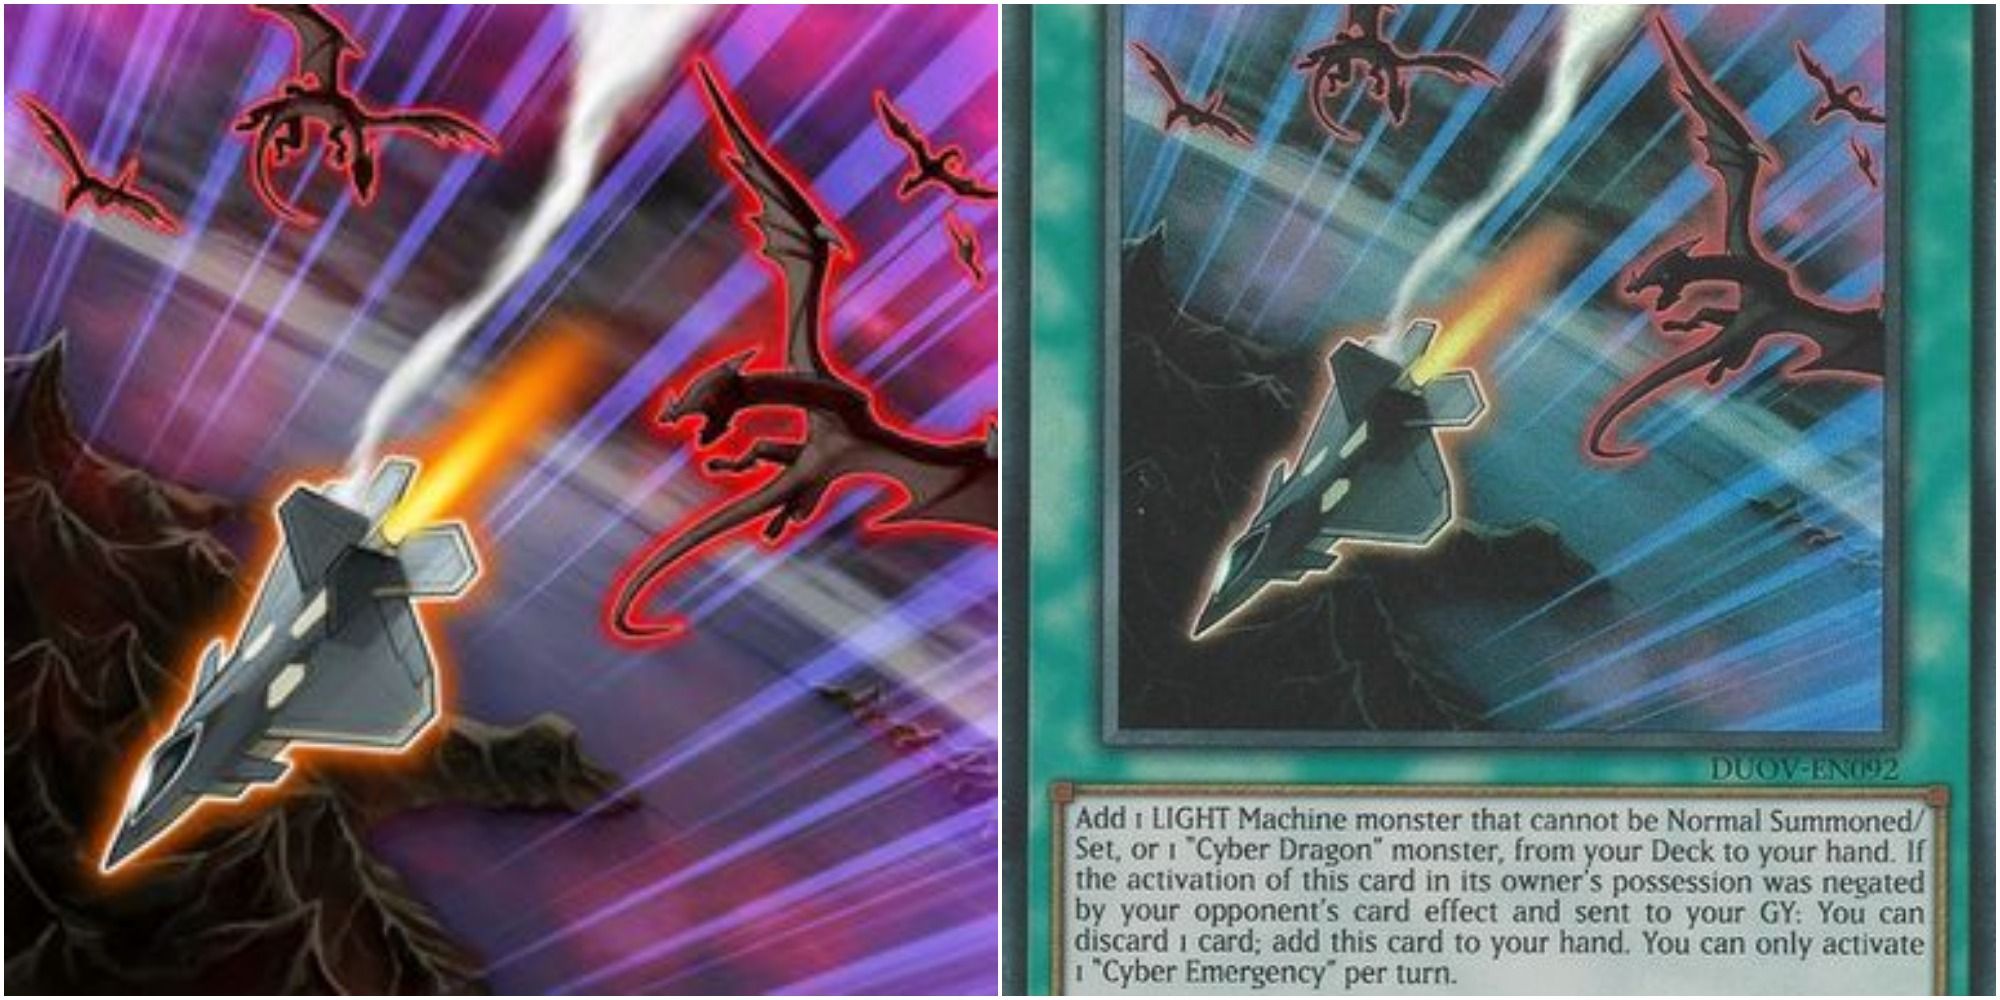 yugioh cyber emergency card art and text